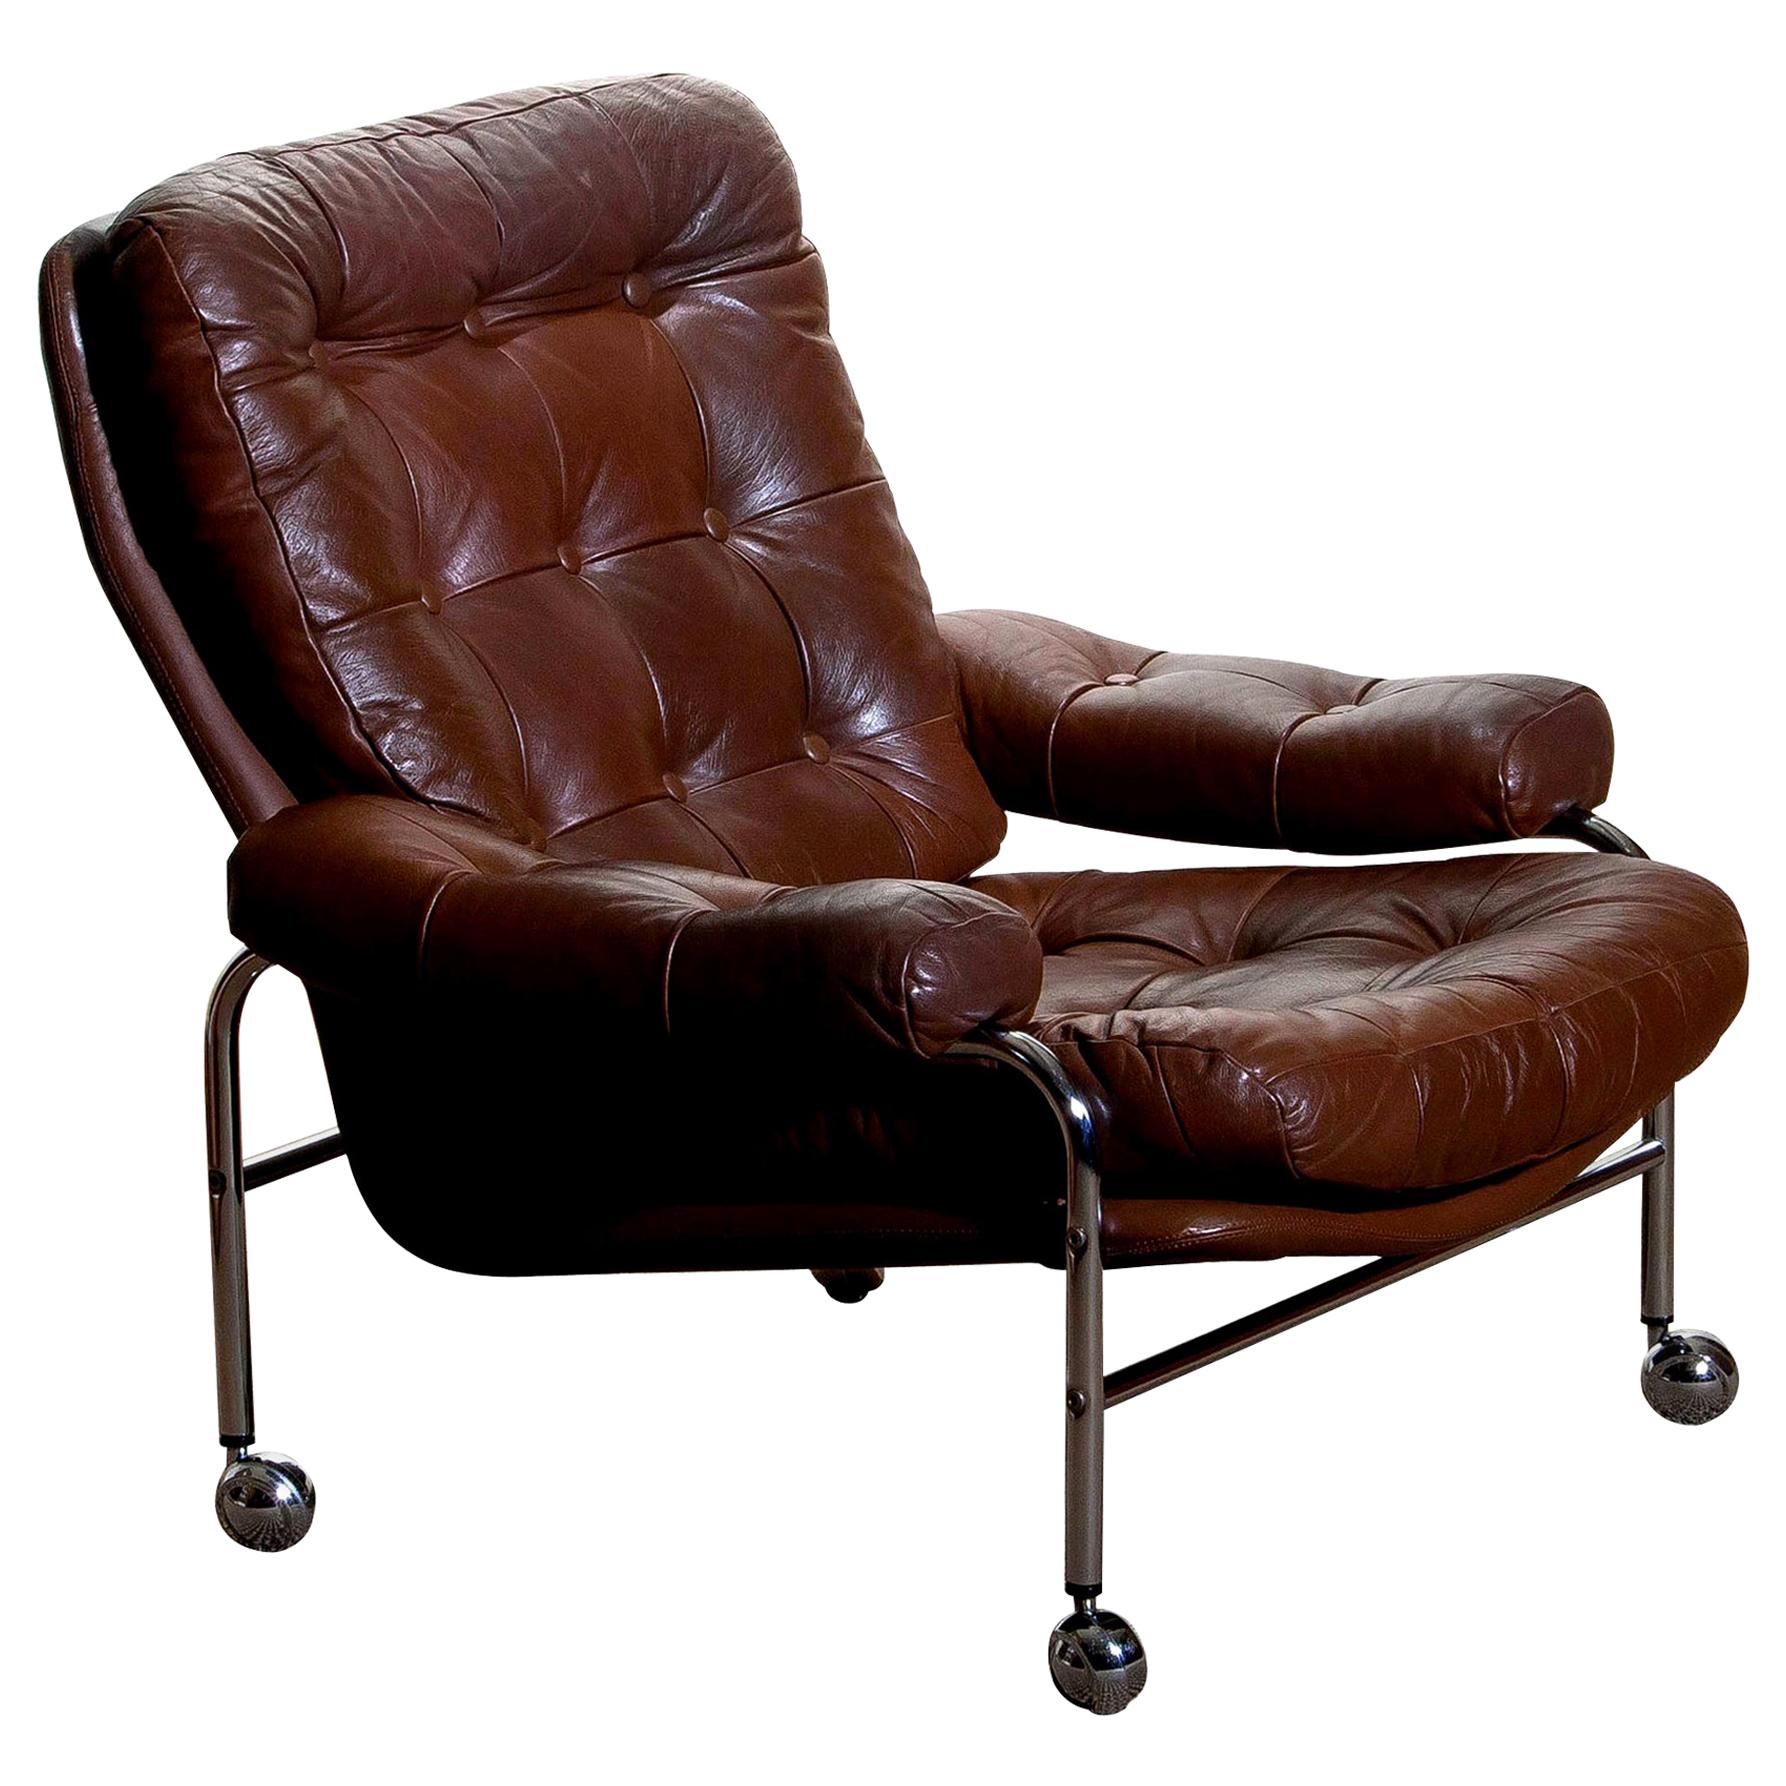 Extremely comfortable easy or lounge chair made by Scapa Rydaholm, Sweden.
This, typical Scandinavian chair is upholstered with brown leather based on a chromed metal frame.
All in perfect condition.
Note: We have two chairs on stock!
 